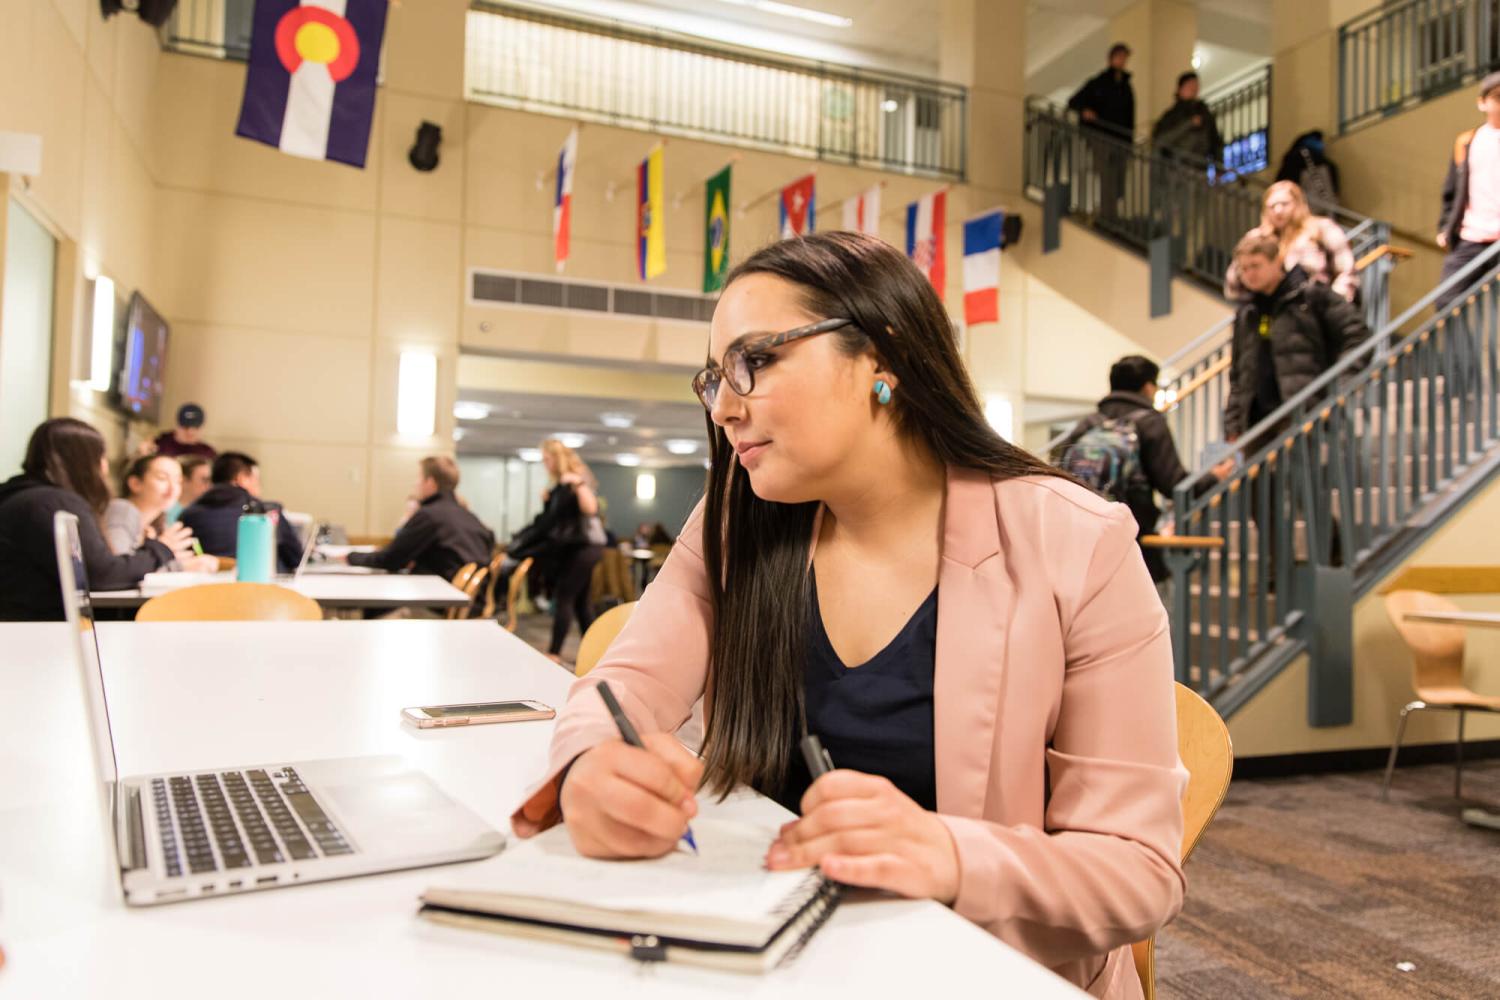 A student studies on her laptop in the common area of the international building on campus with students moving in the background